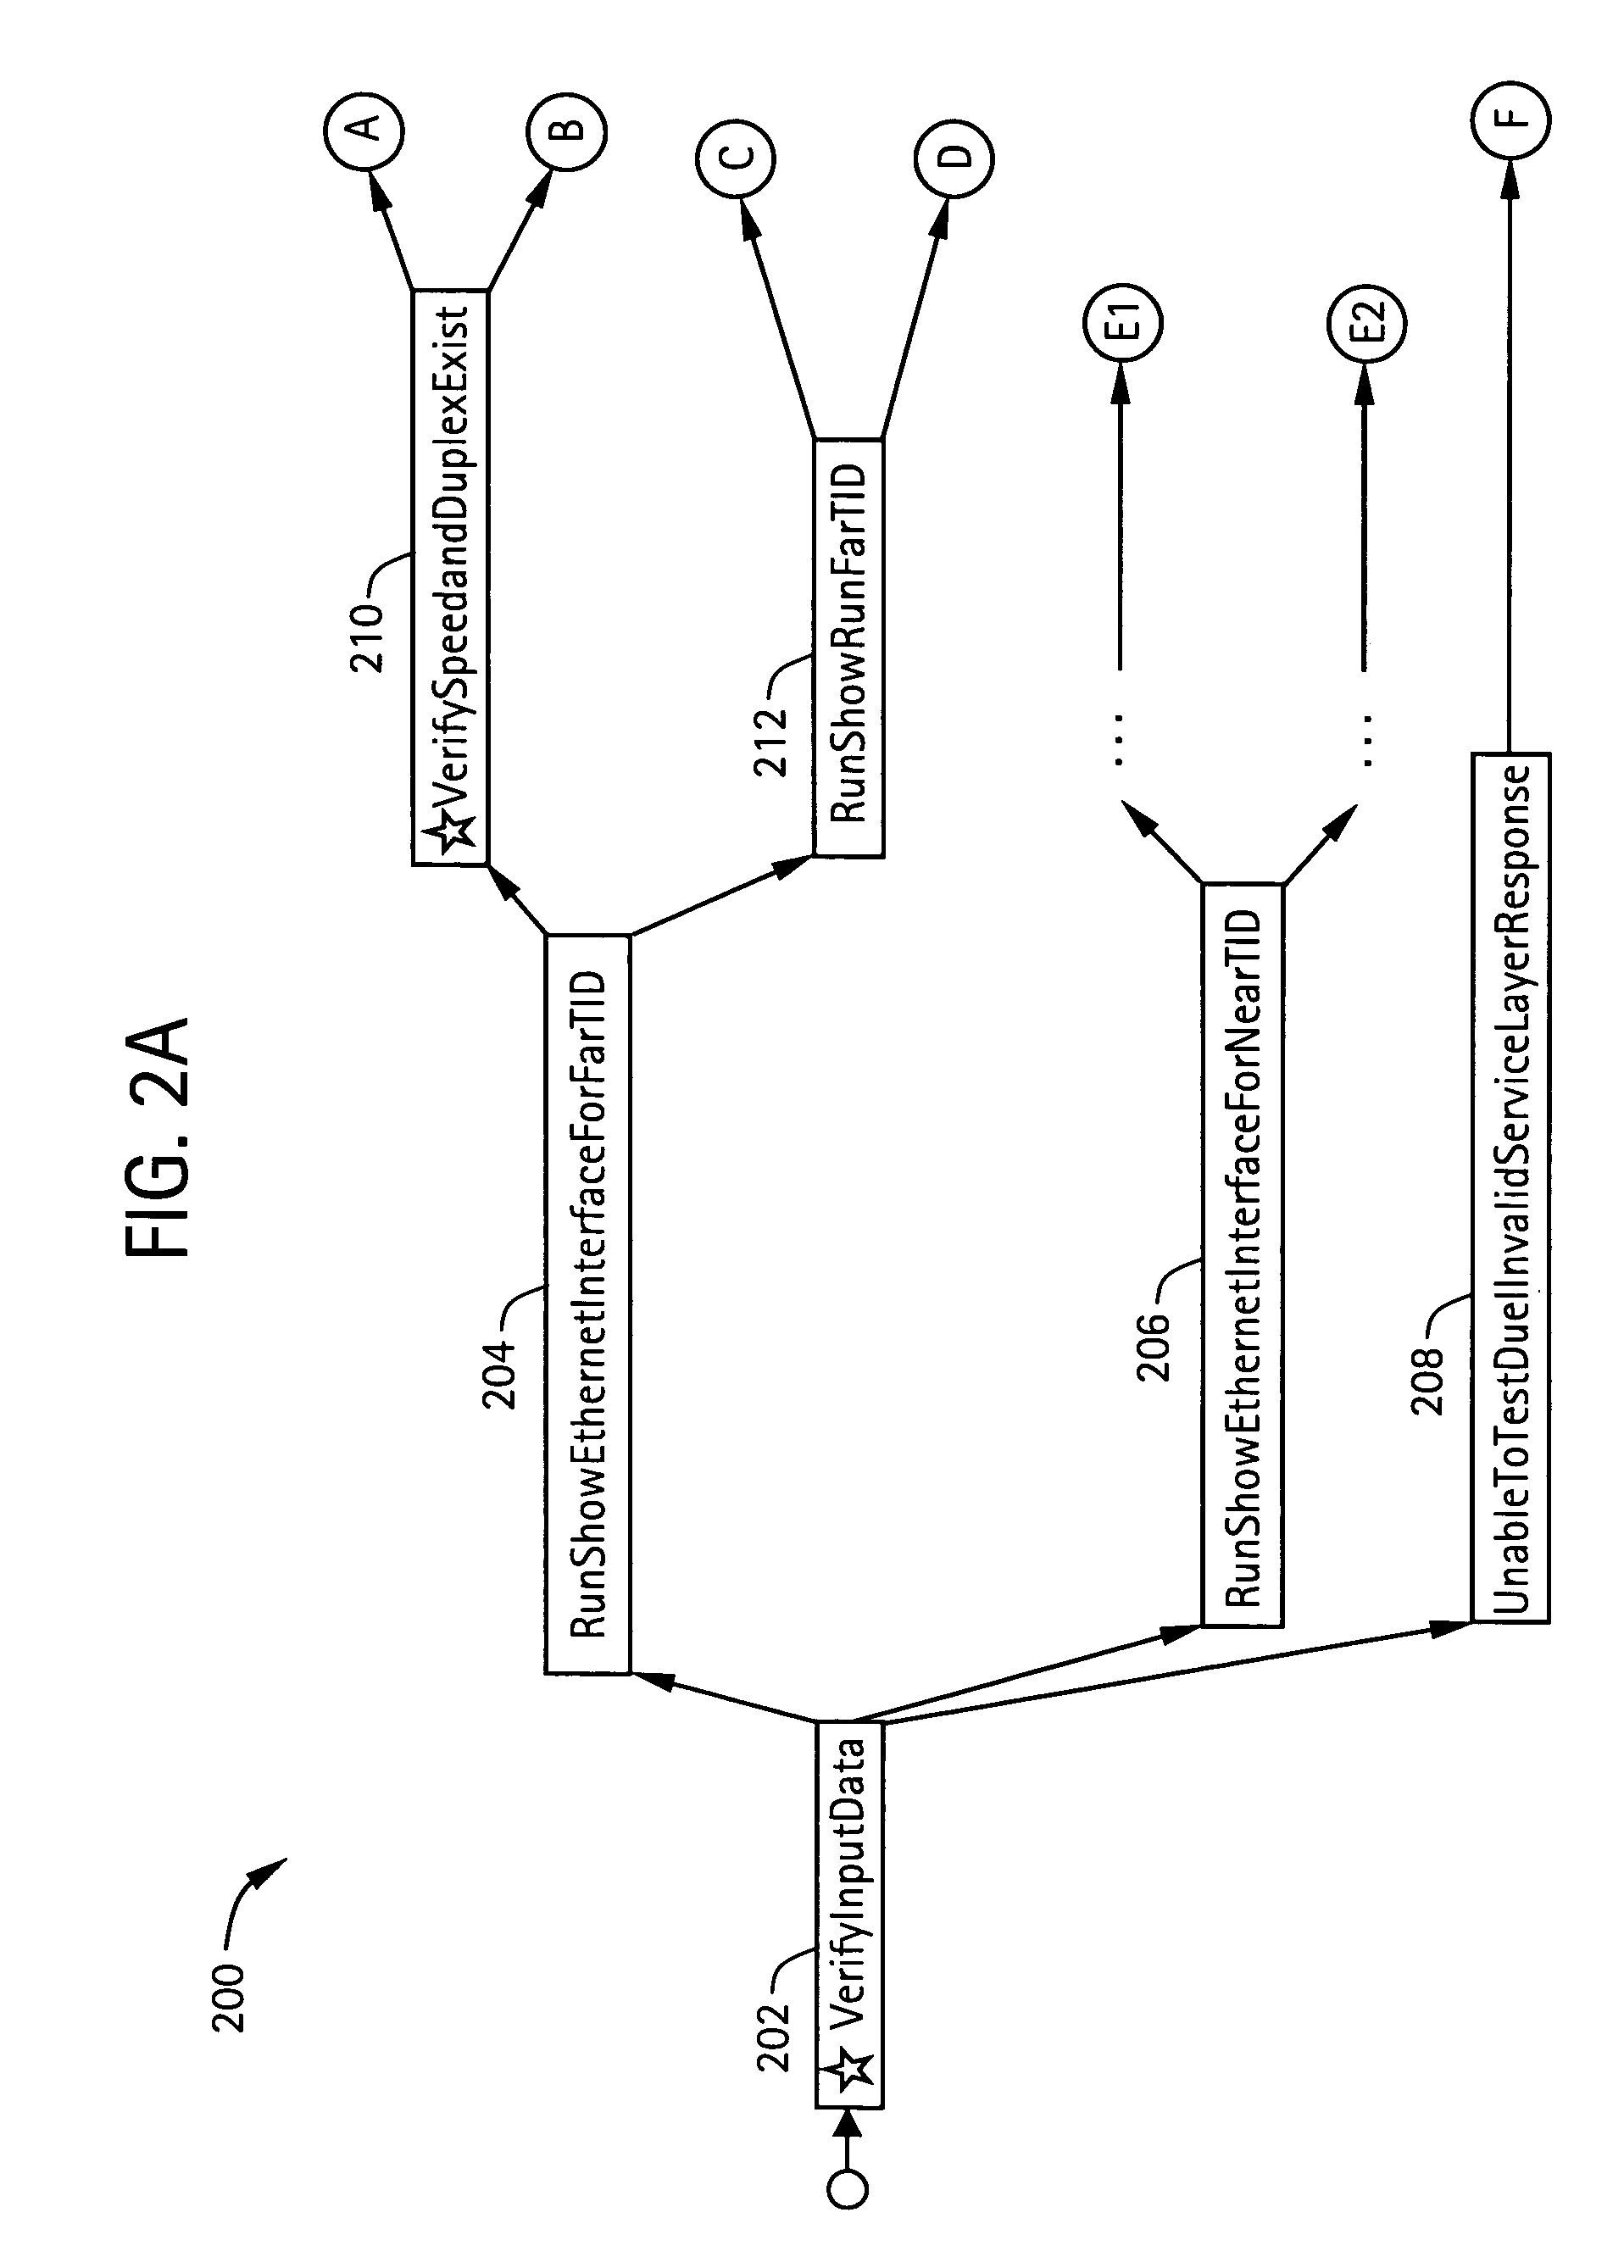 System and method for integrating multiple data sources into service-centric computer networking services diagnostic conclusions